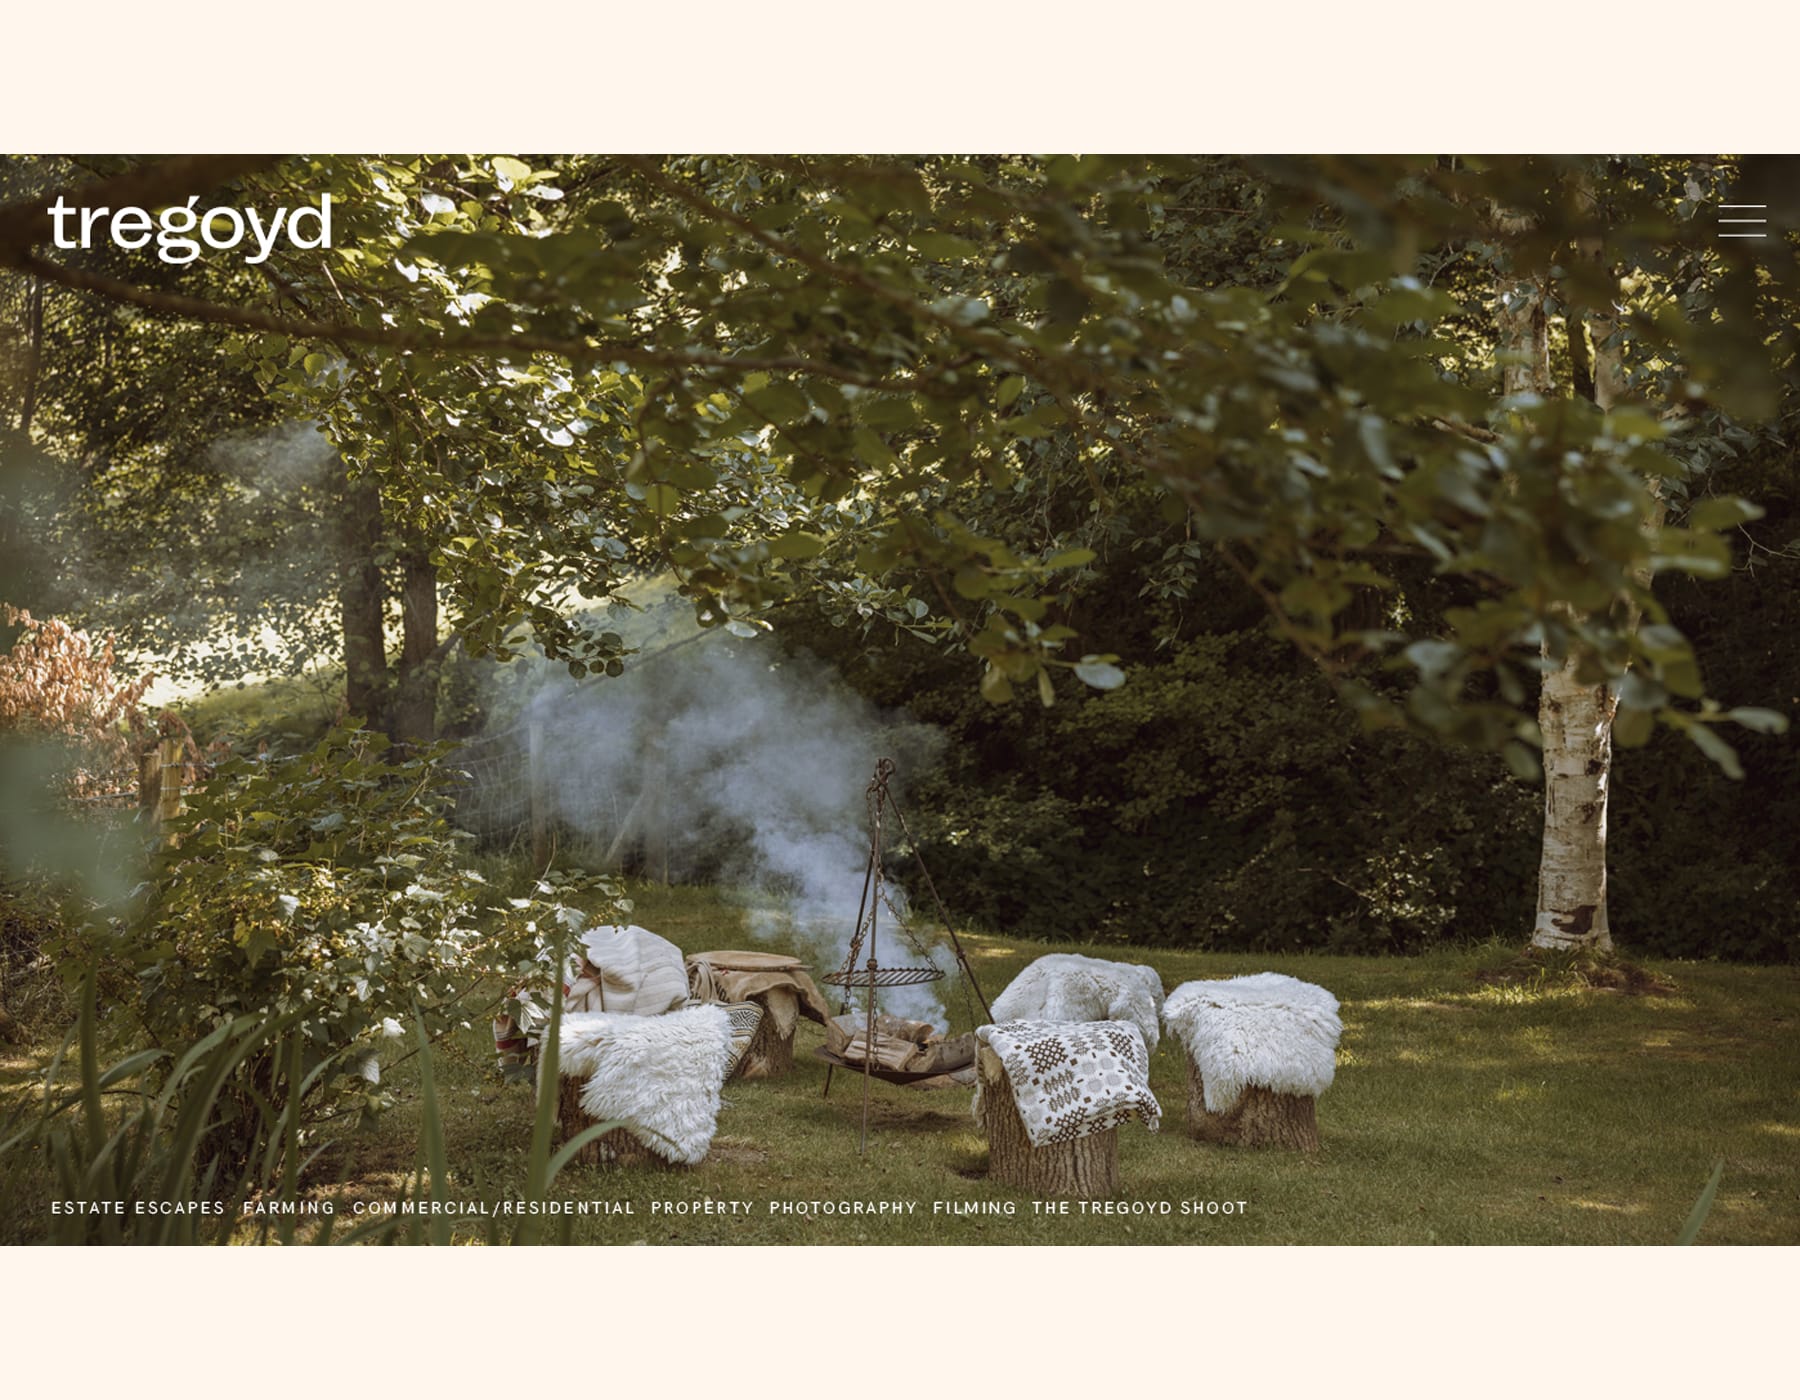 Tregoyd identity by Colour Format - photograph by Finn Beales